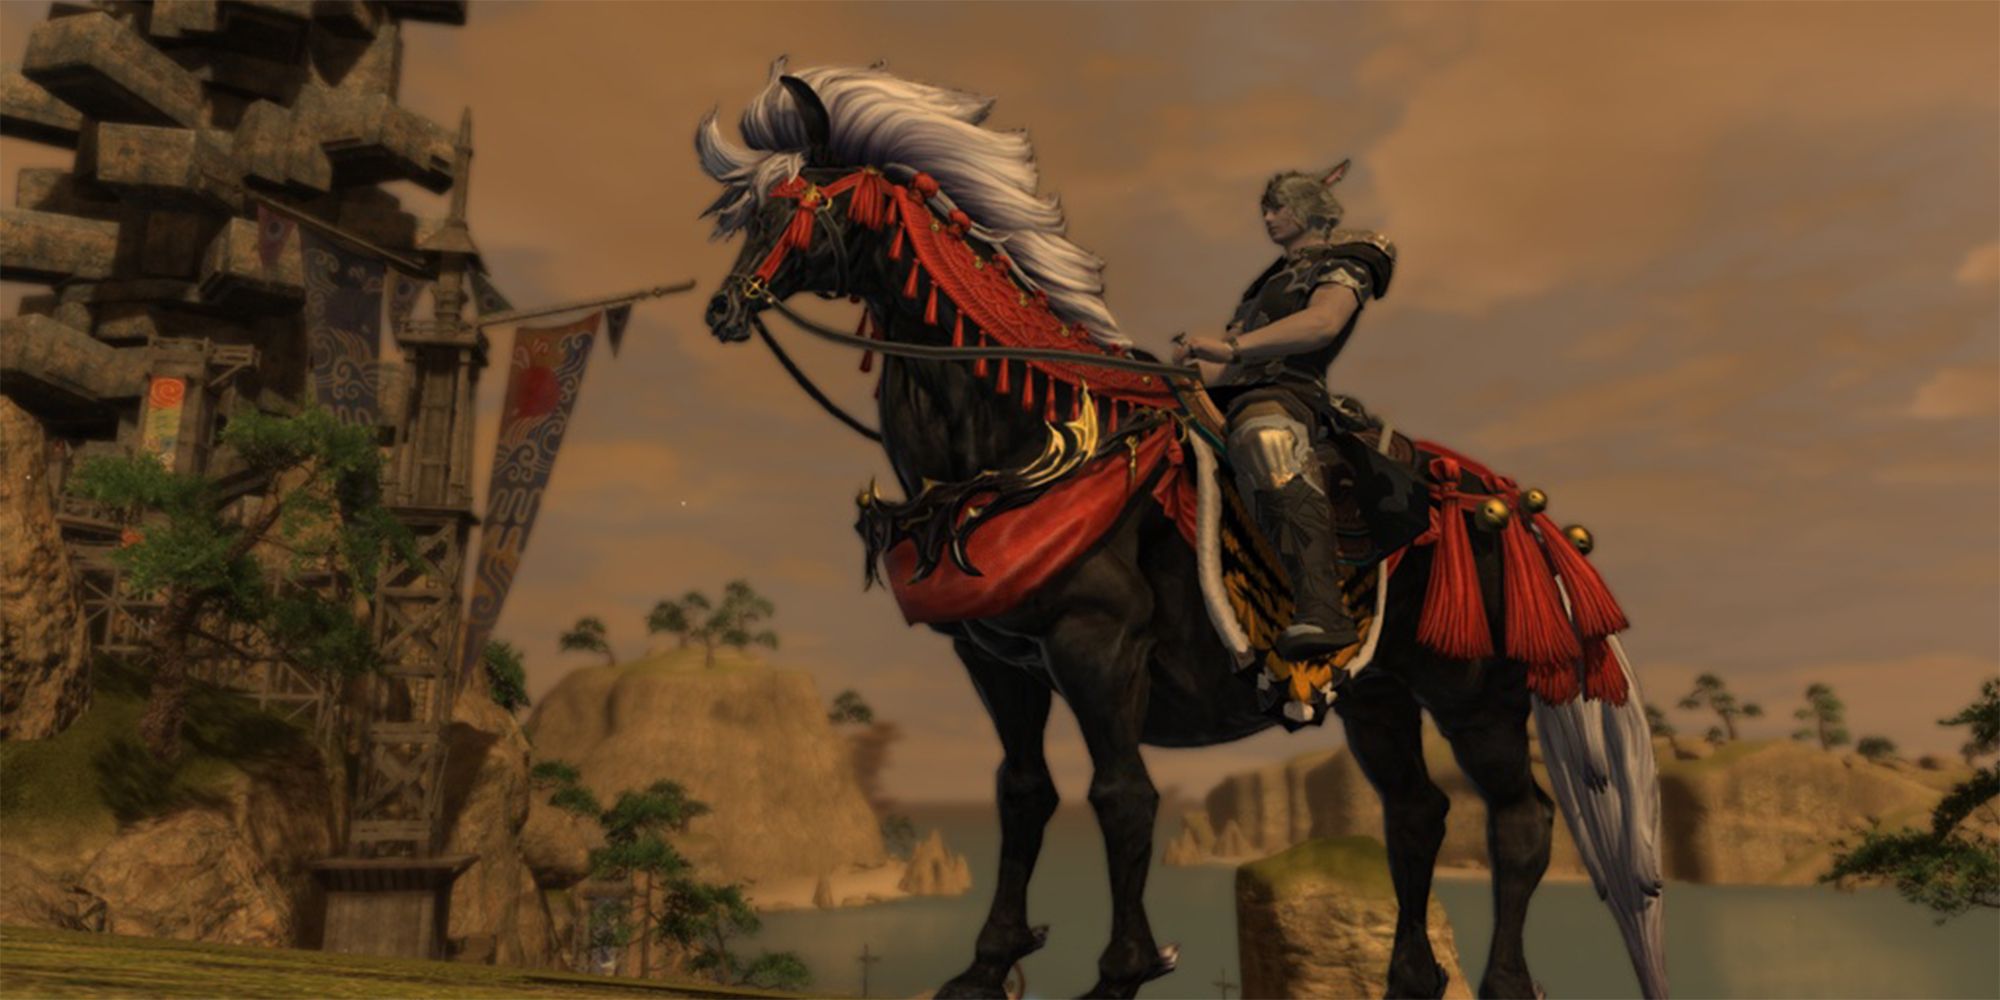 player character riding the juedi mount in front of heaven-on-high and the ruby sea